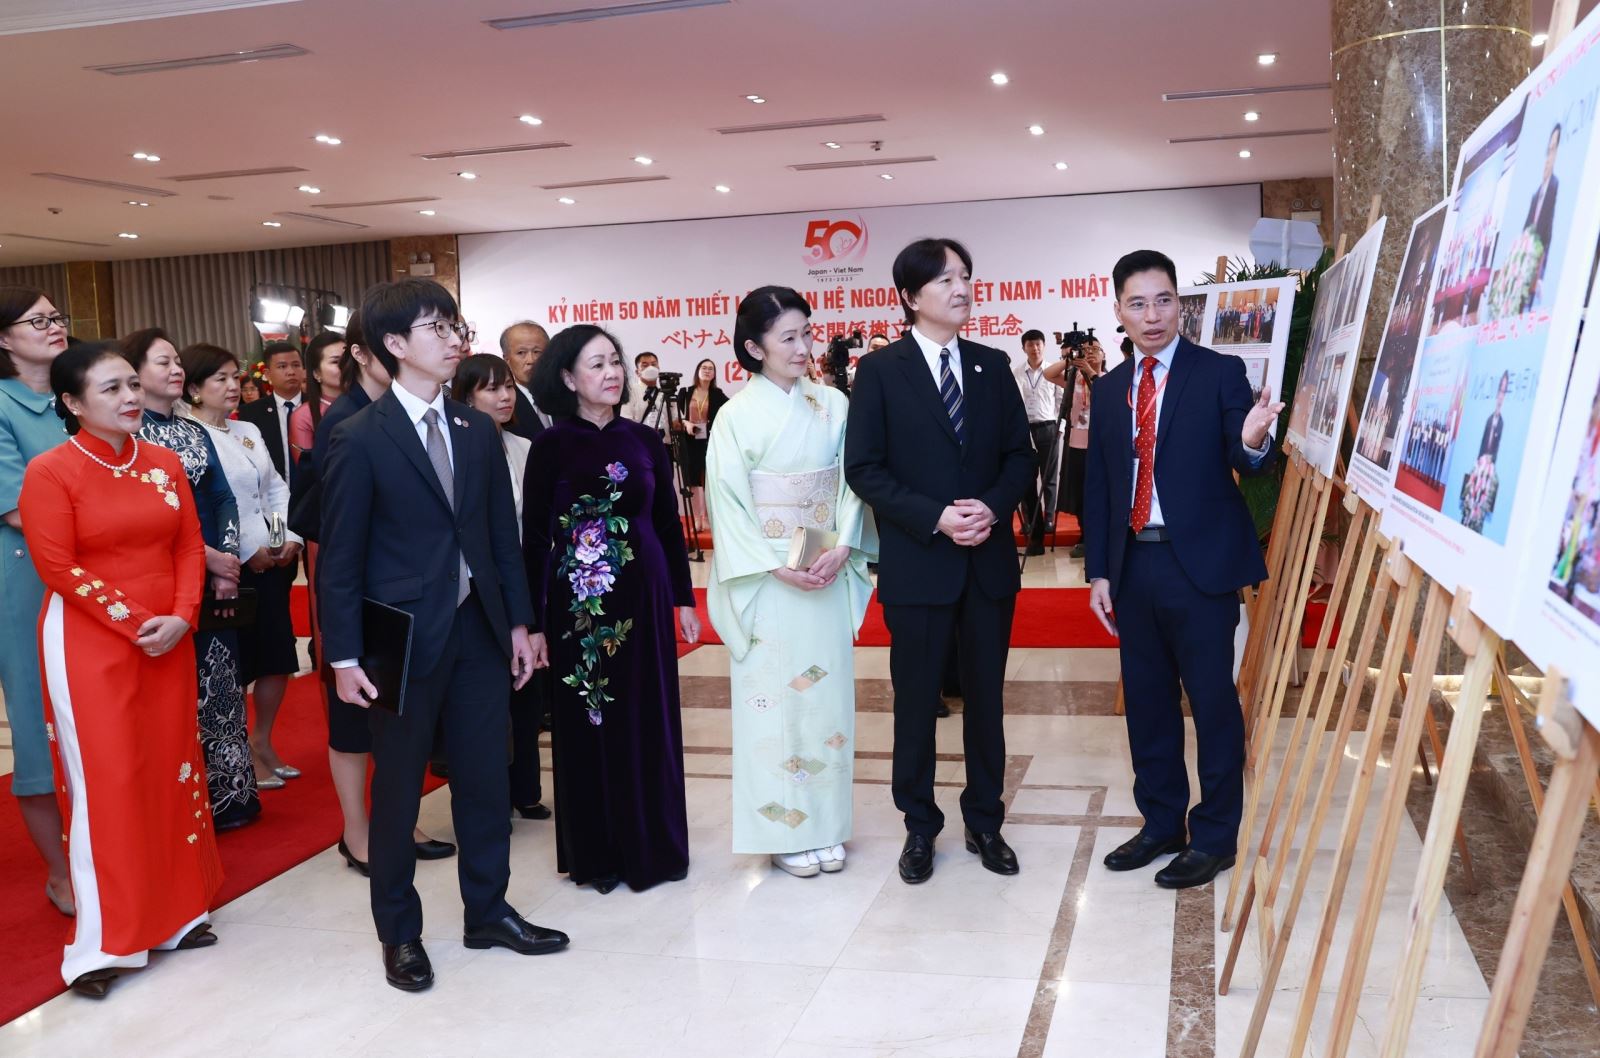 Ceremony marks 50th anniversary of Vietnam-Japan diplomatic relations